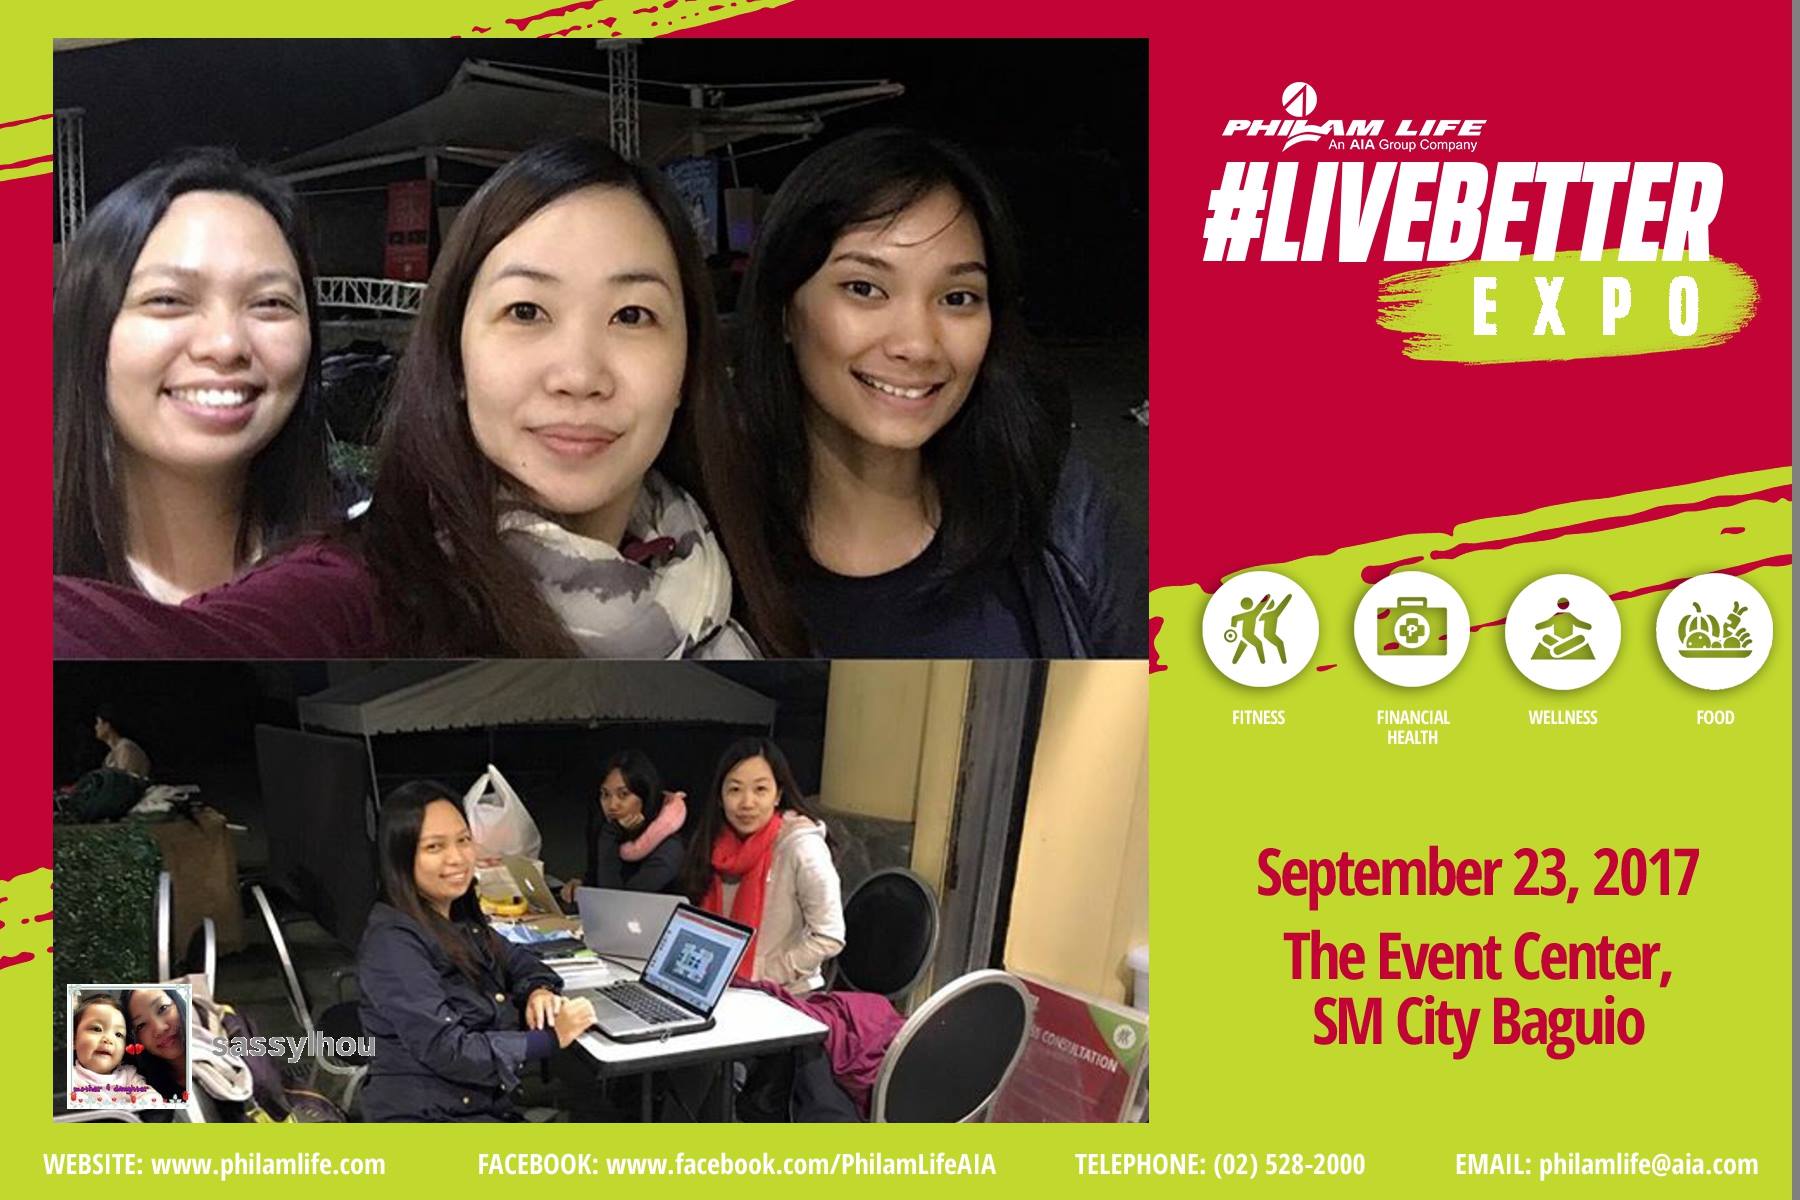 Philam Life #LiveBetter Expo at Baguio – Hashtag Project